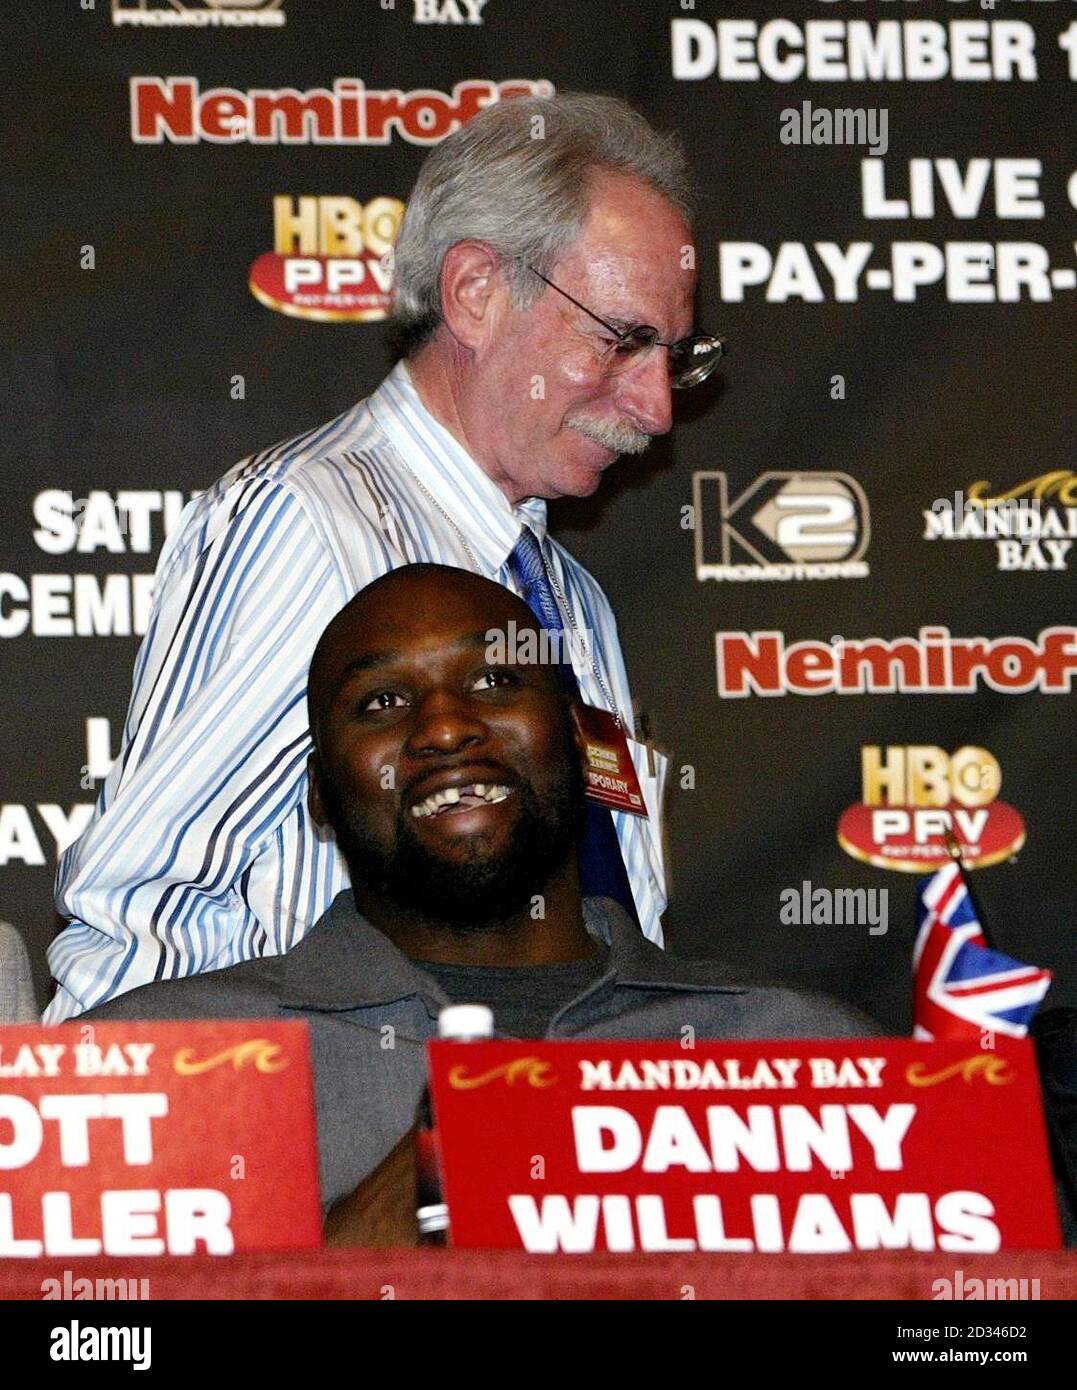 Marc Ratner (behind) from Nevada State Boxing shares a joke with Britain's Danny Williams during a press conference in Las Vegas, USA, ahead of the WBC Heavyweight title fight against Ukrainian boxer Vitali Klitschko on Saturday 11th December. Stock Photo